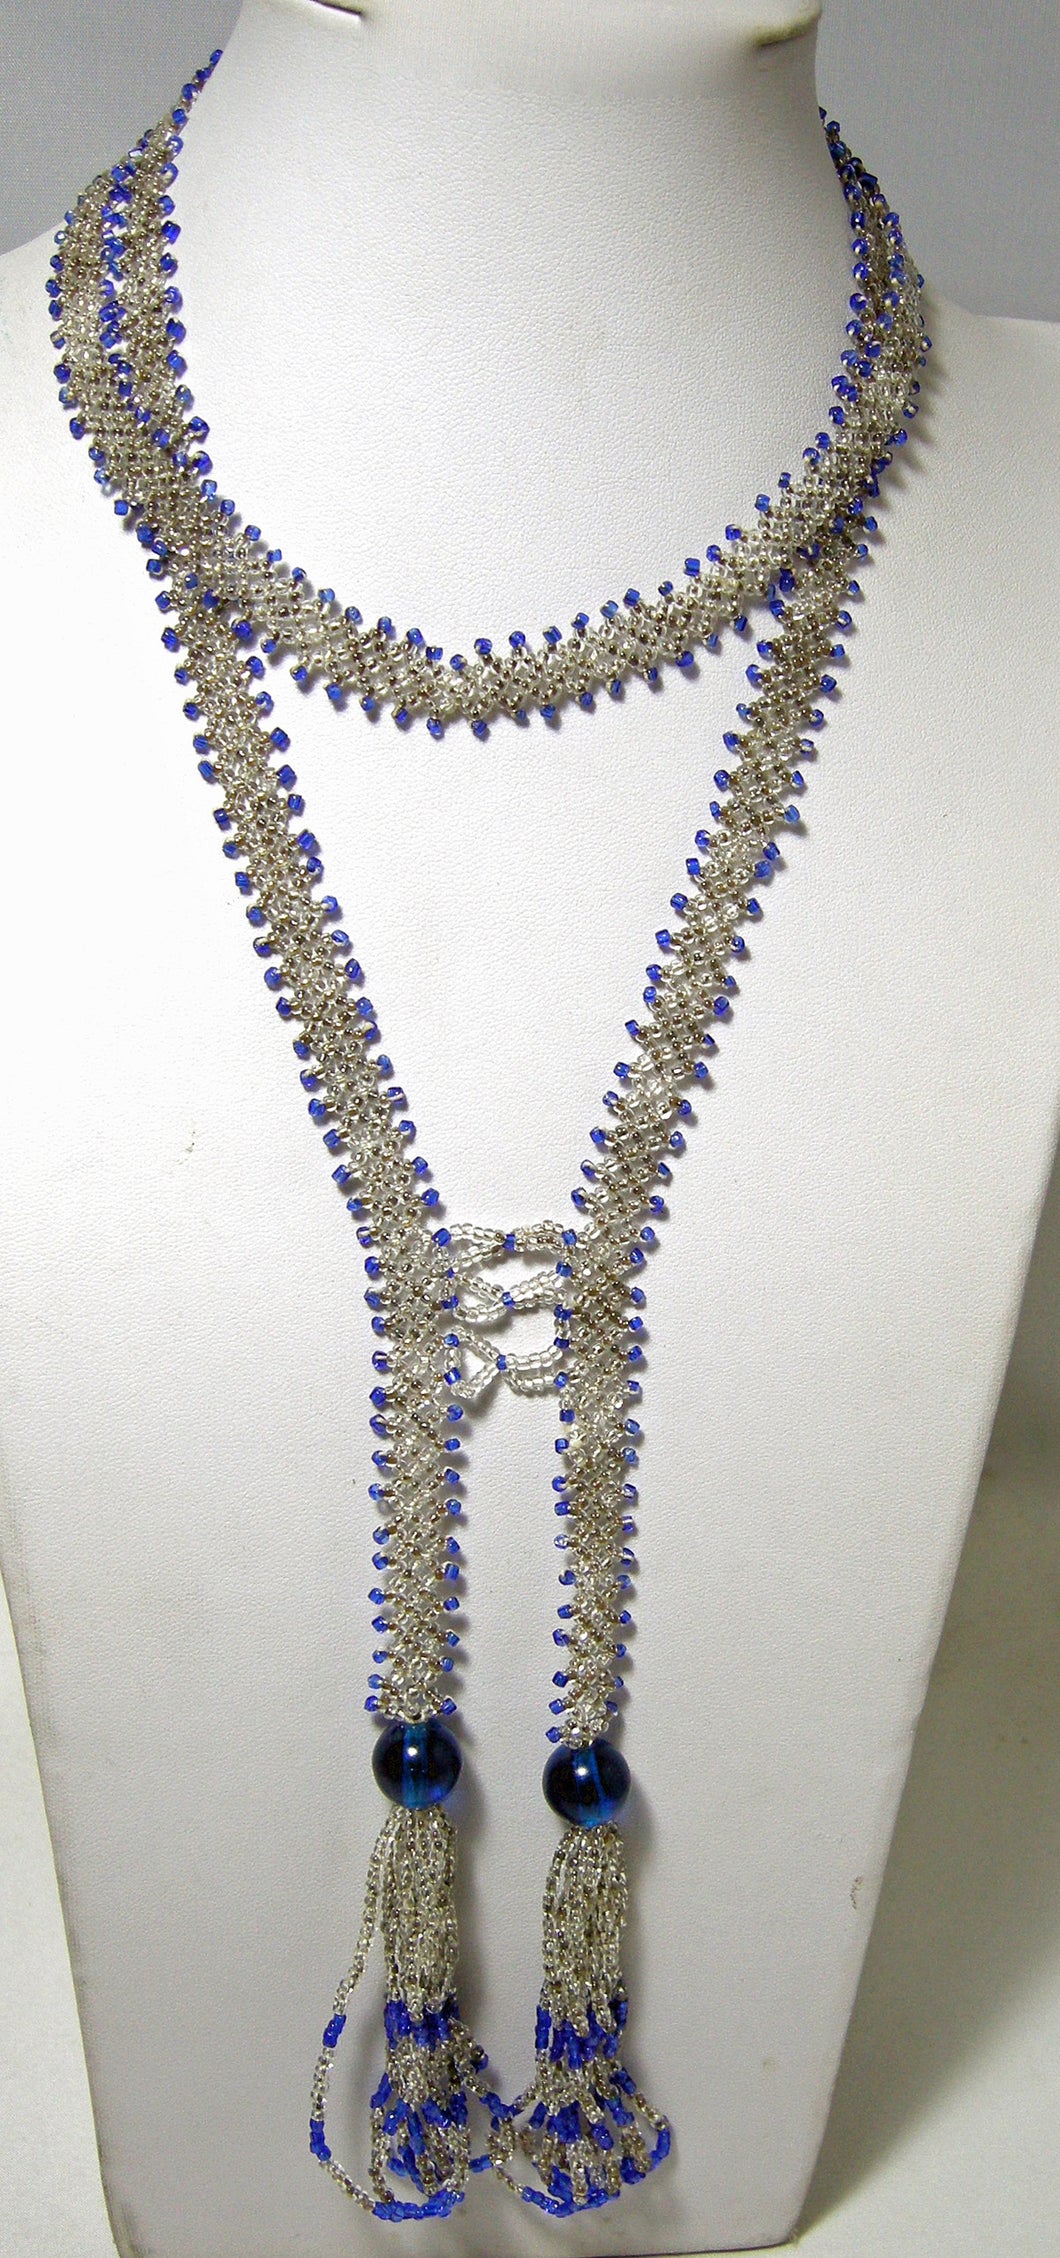 Vintage Hand Woven Deco Flapper Beaded Necklace  - JD10508